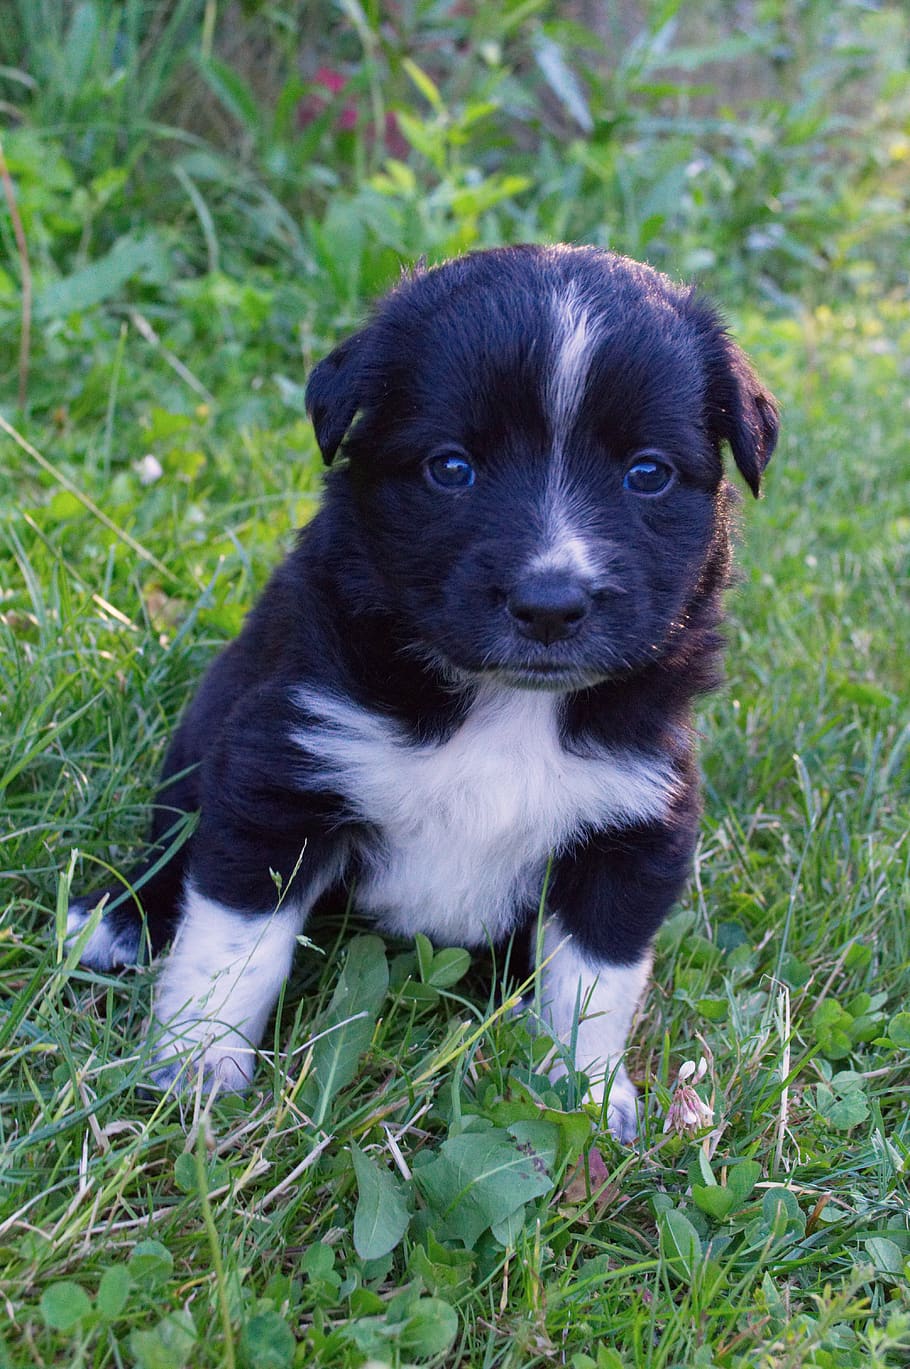 black and white, puppy, do, dog, cute, pet, animal, puppies